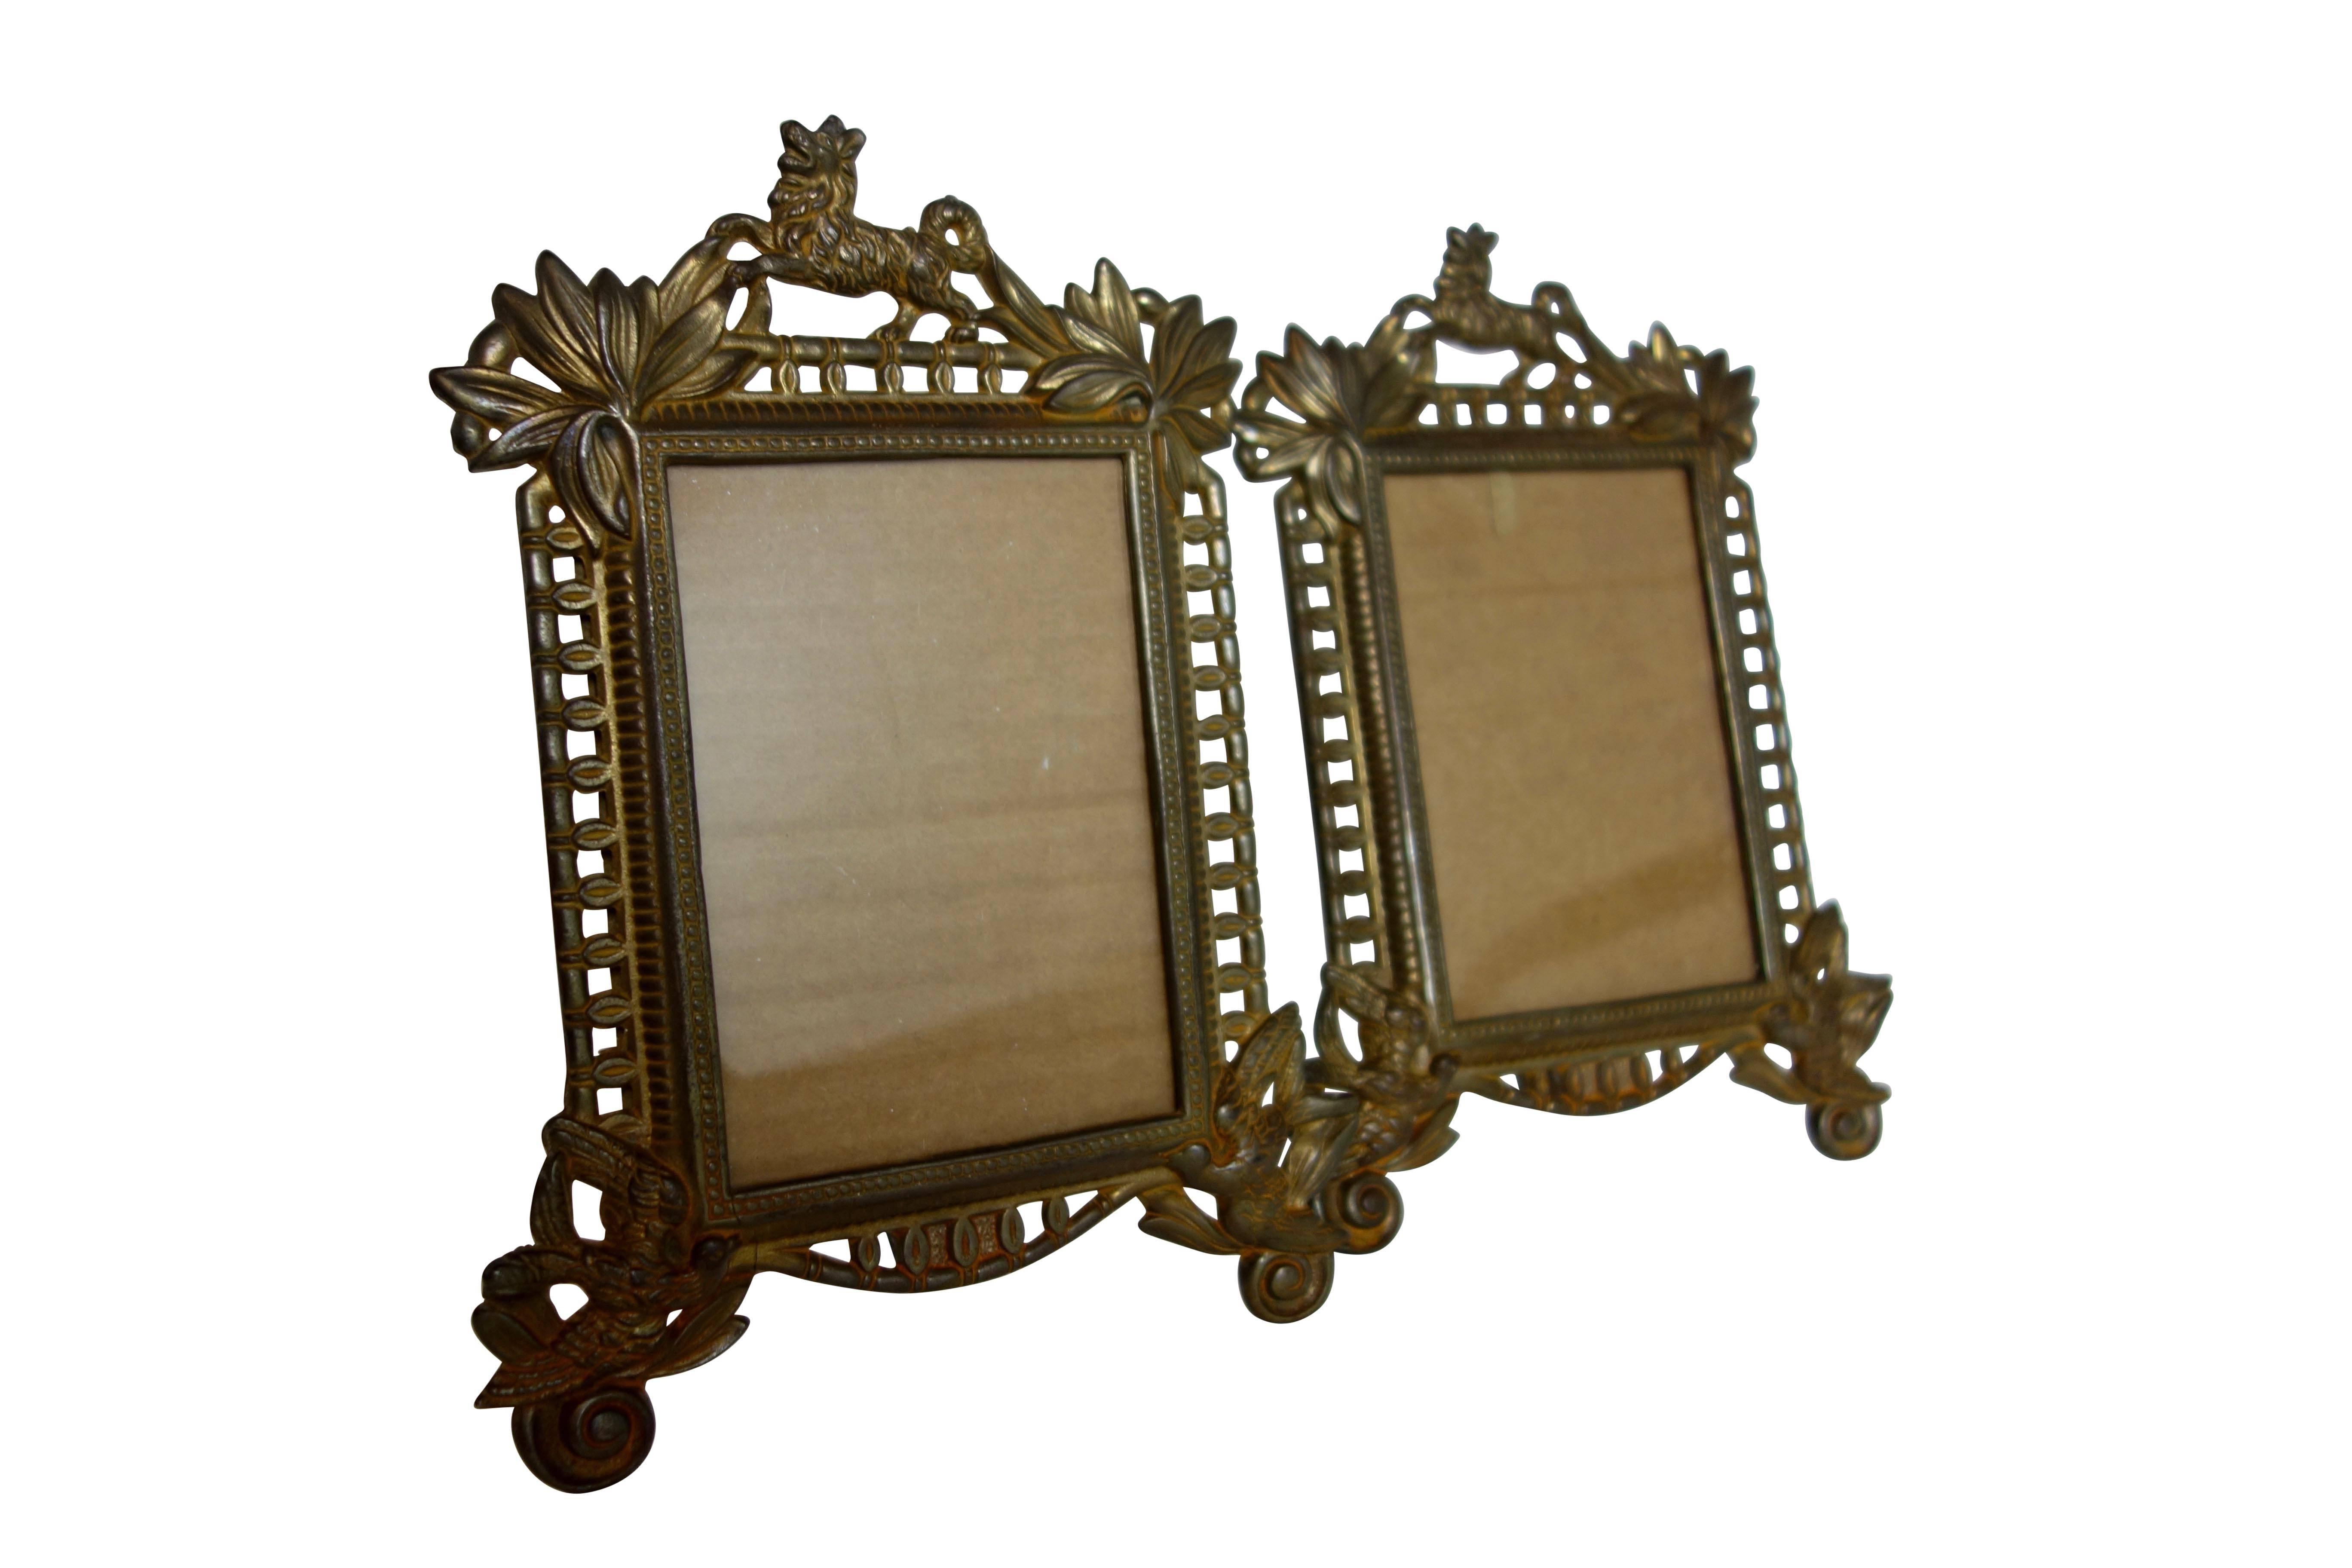 This is a pair of 19th century French gilt frames with dogs and birds. On the back there's a makers mark stamped 